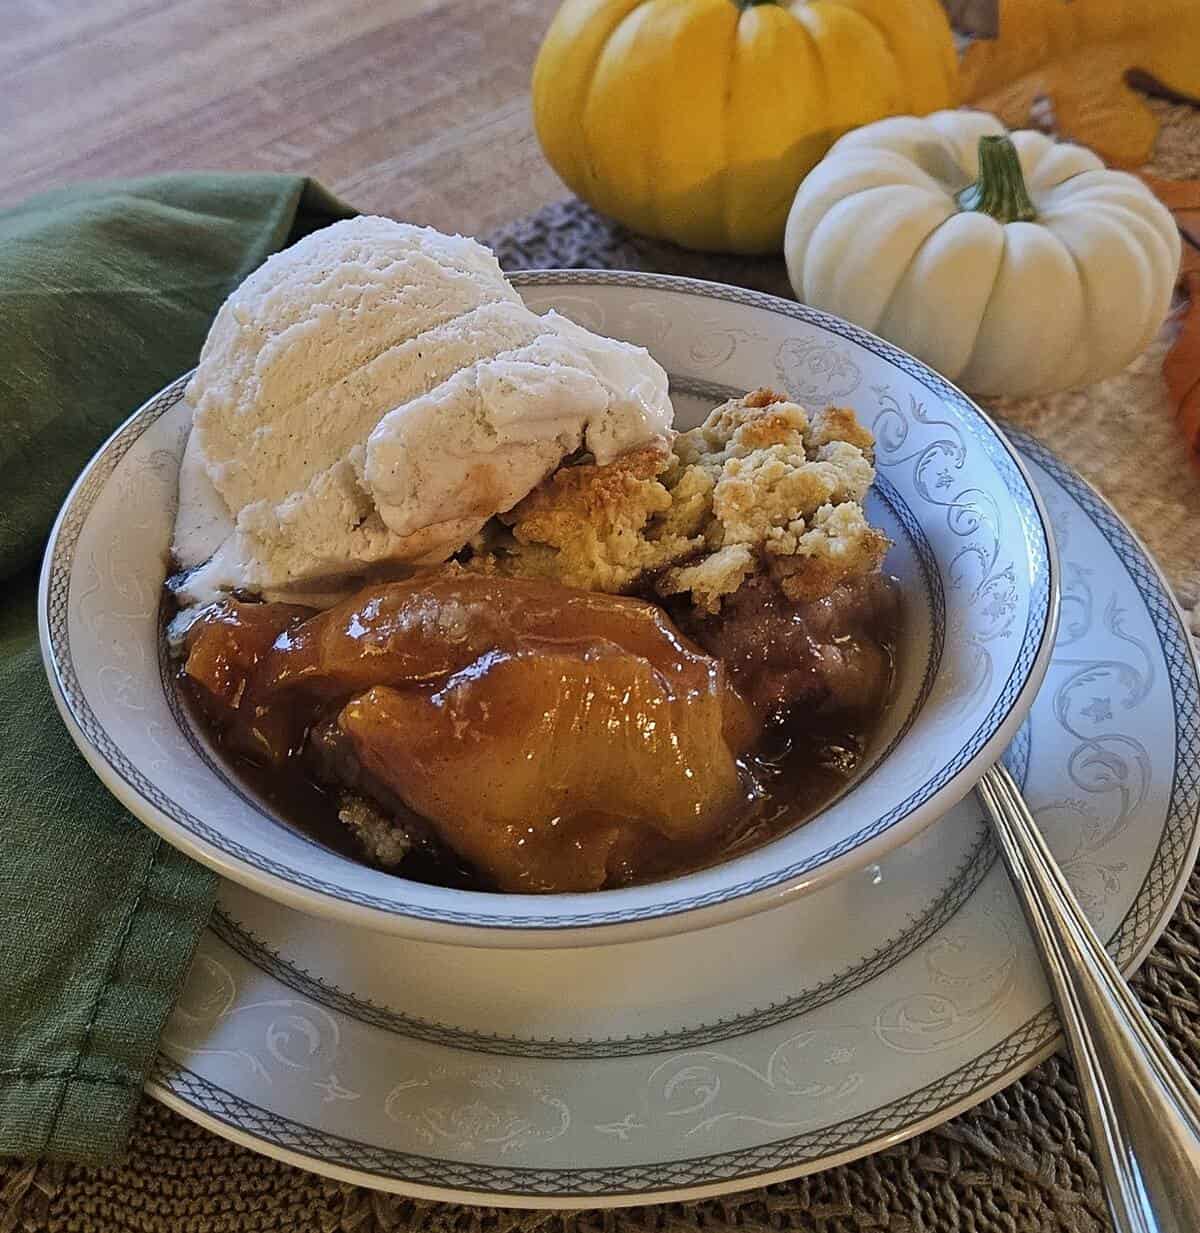 finished portion of peach cobbler in bowl with a scoop of vanilla ice cream, a spoon, and cloth napkin